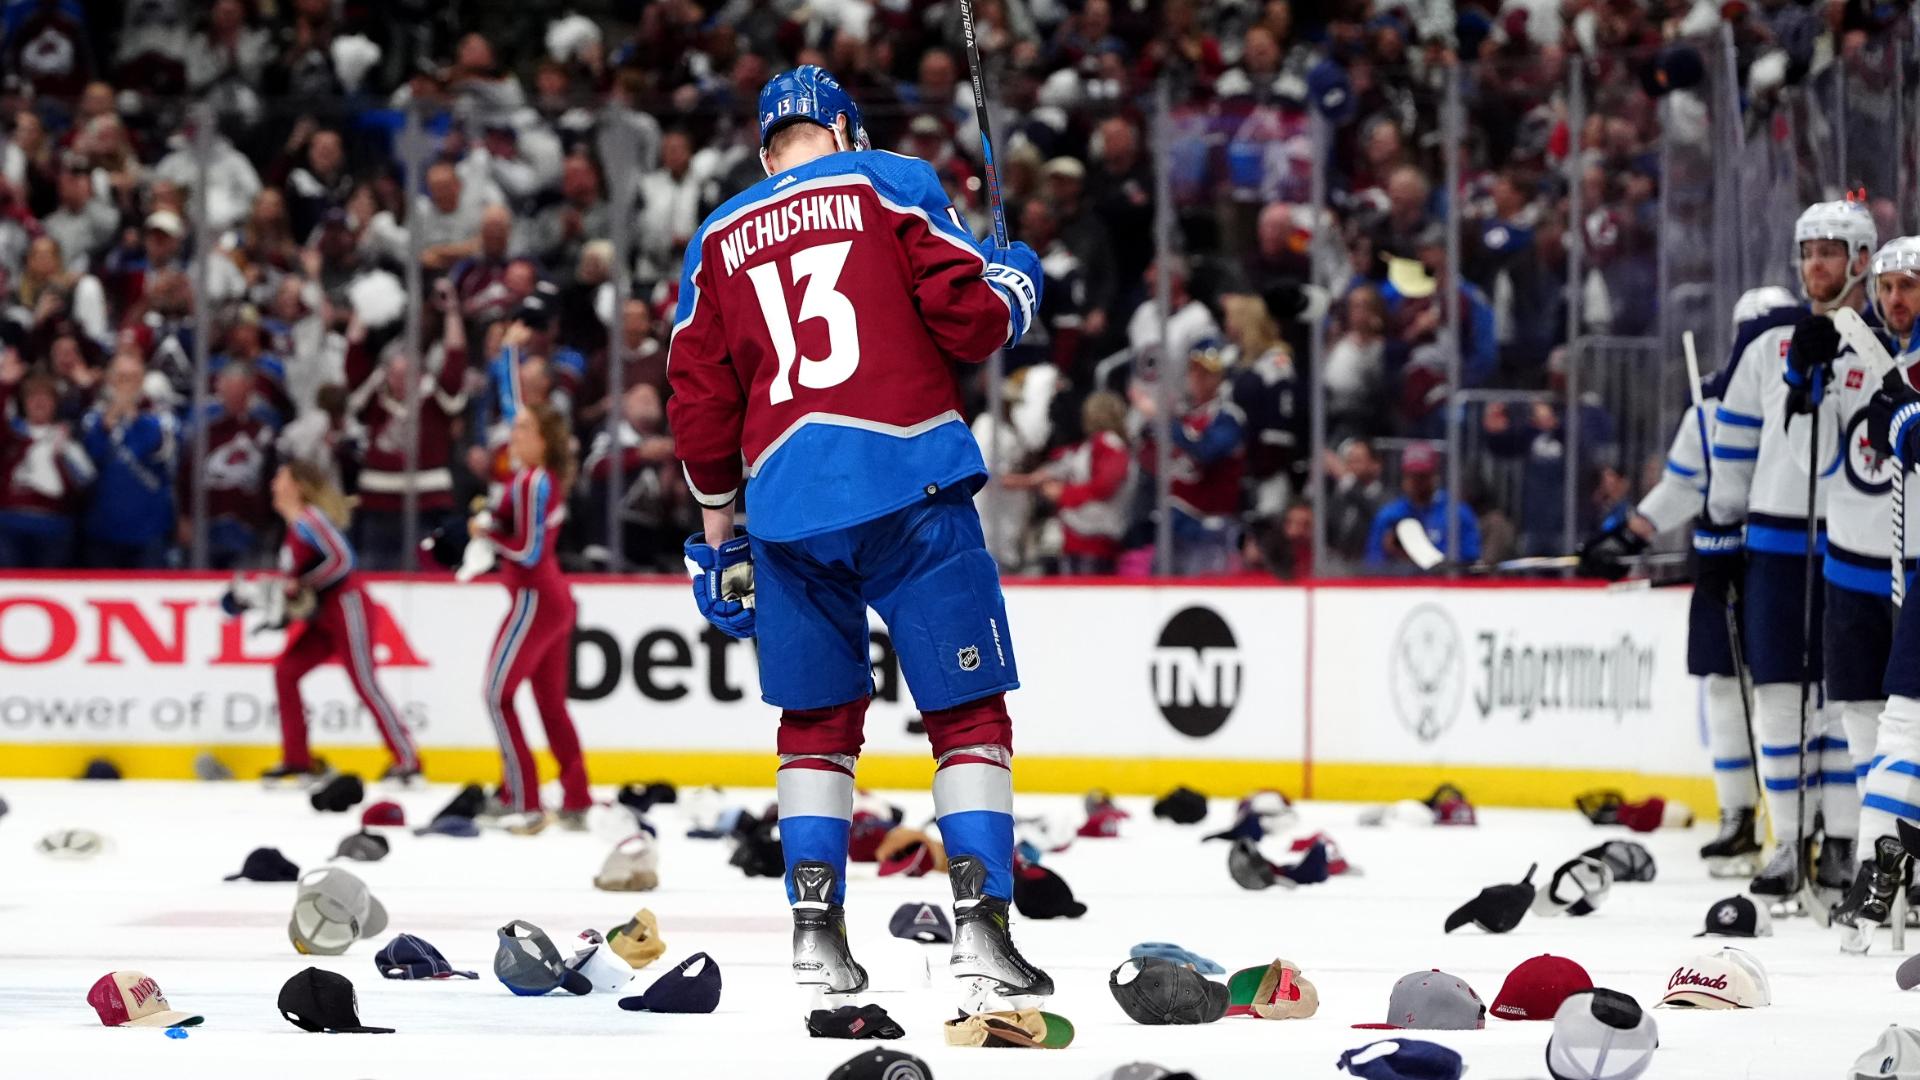 Nichushkin records 1st career hat trick  Avalanche beat Jets 5-1 in Game 4 to take 3-1 series lead